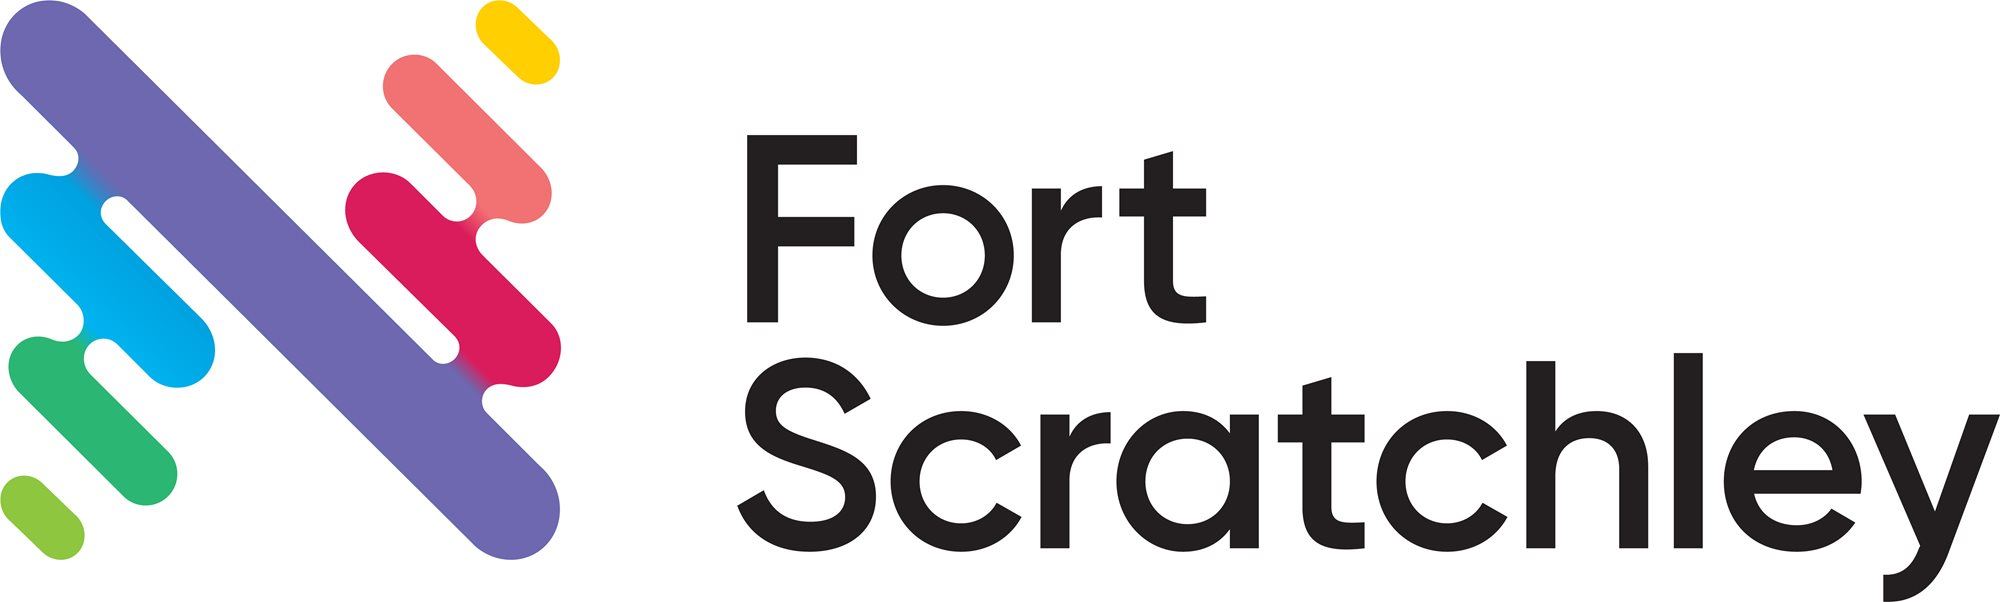 Fort Scratchley logo